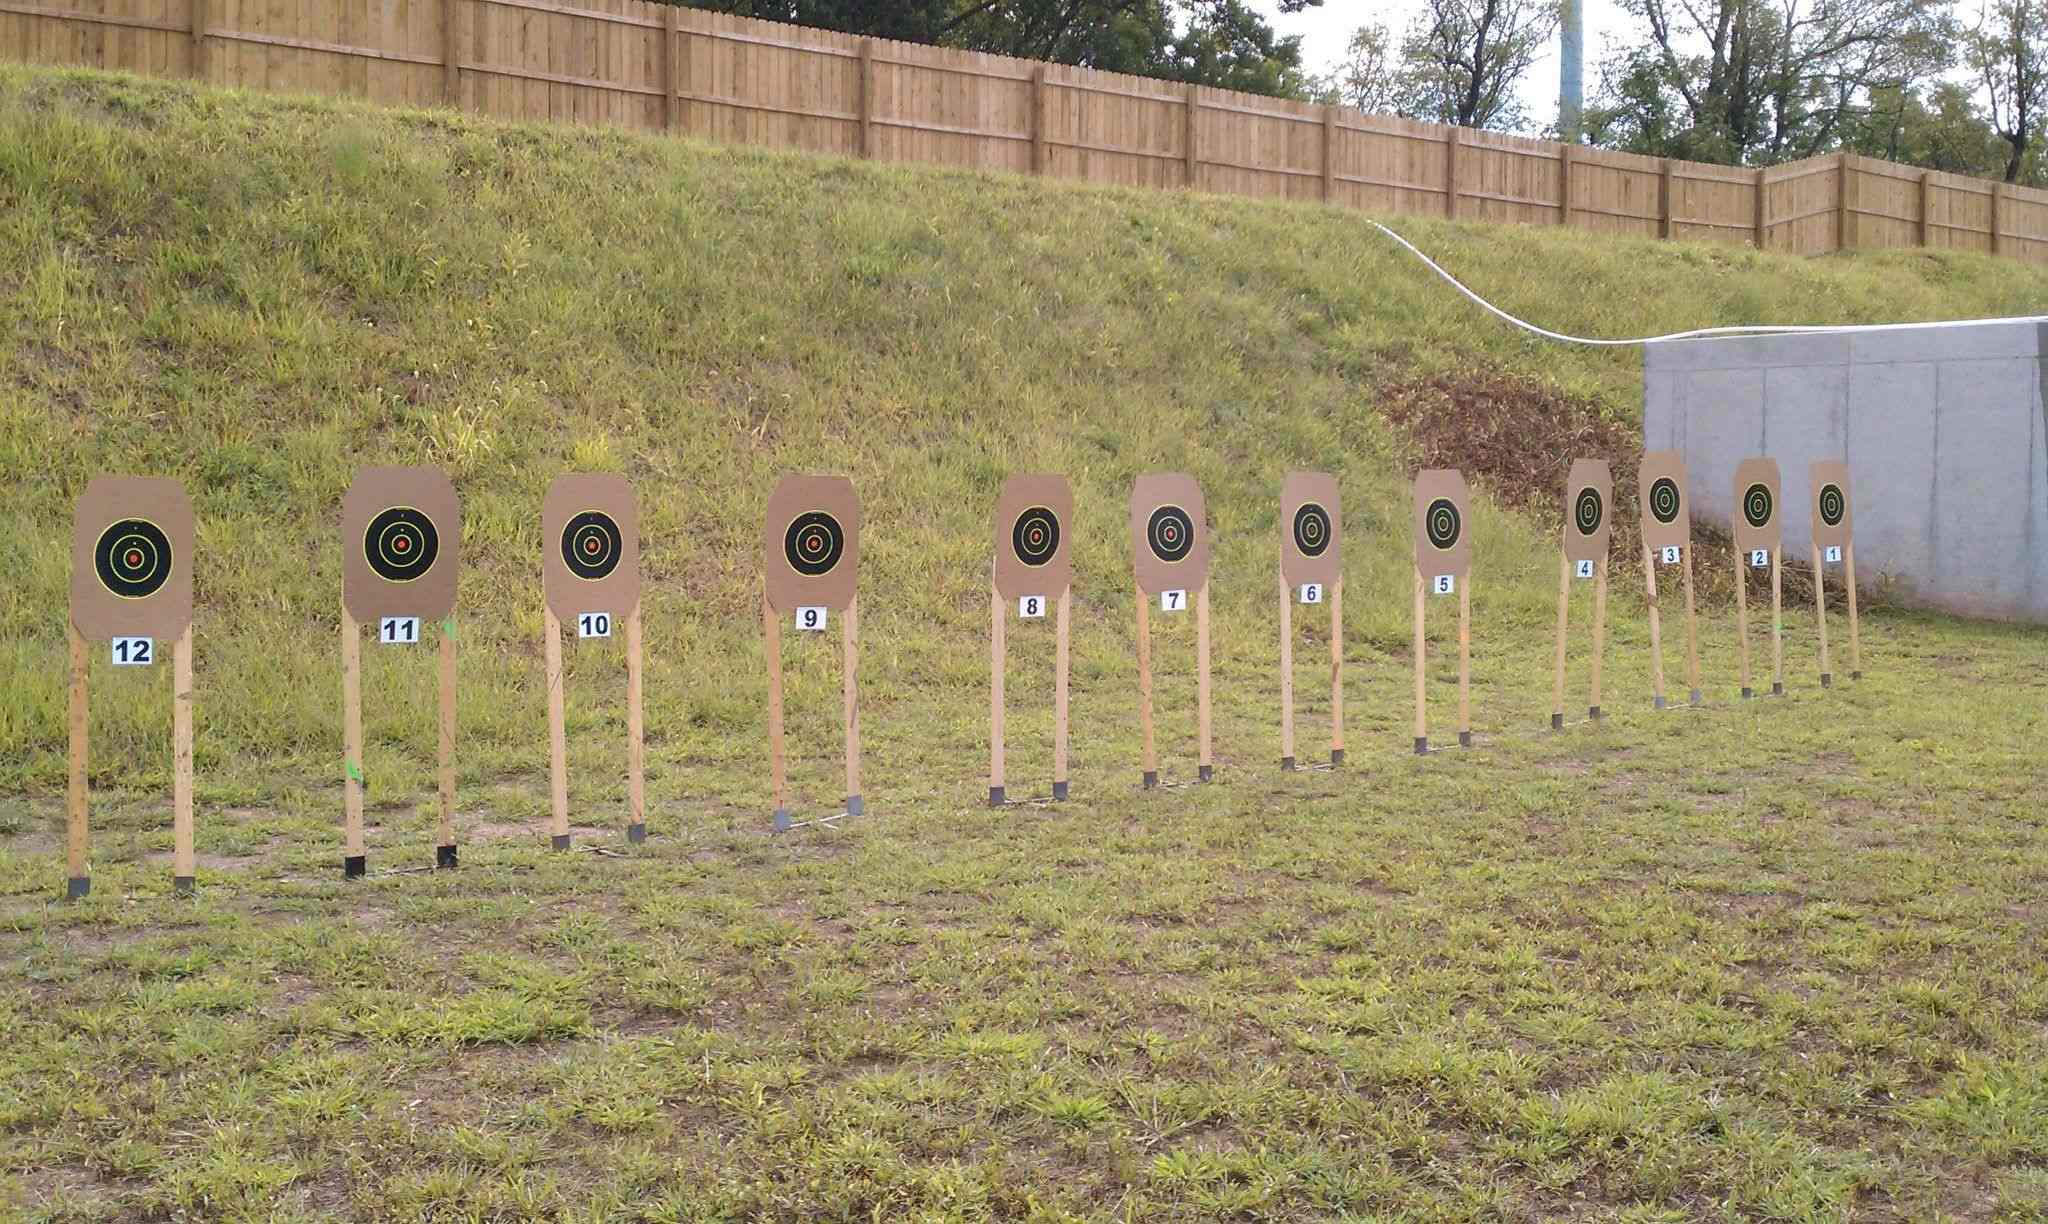 How To Build A Shooting Range In The Backyard